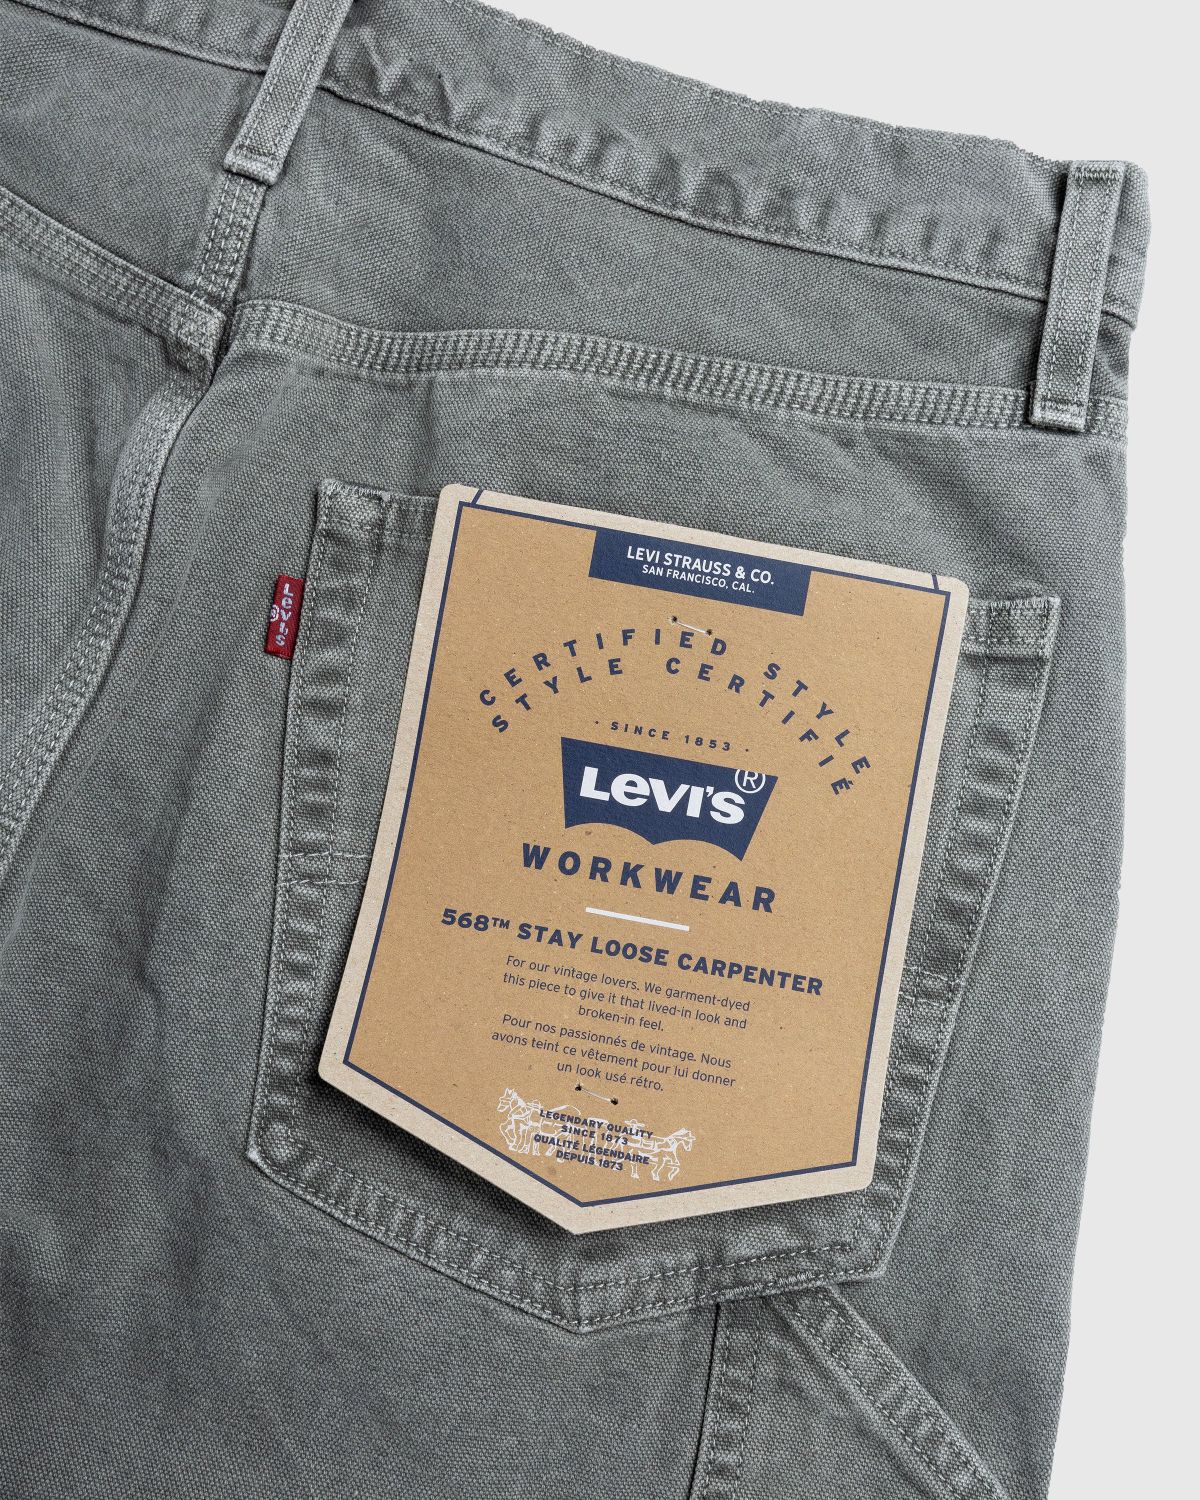 Levi's – 568 Stay Loose Carpenter Green - Pants - Green - Image 6